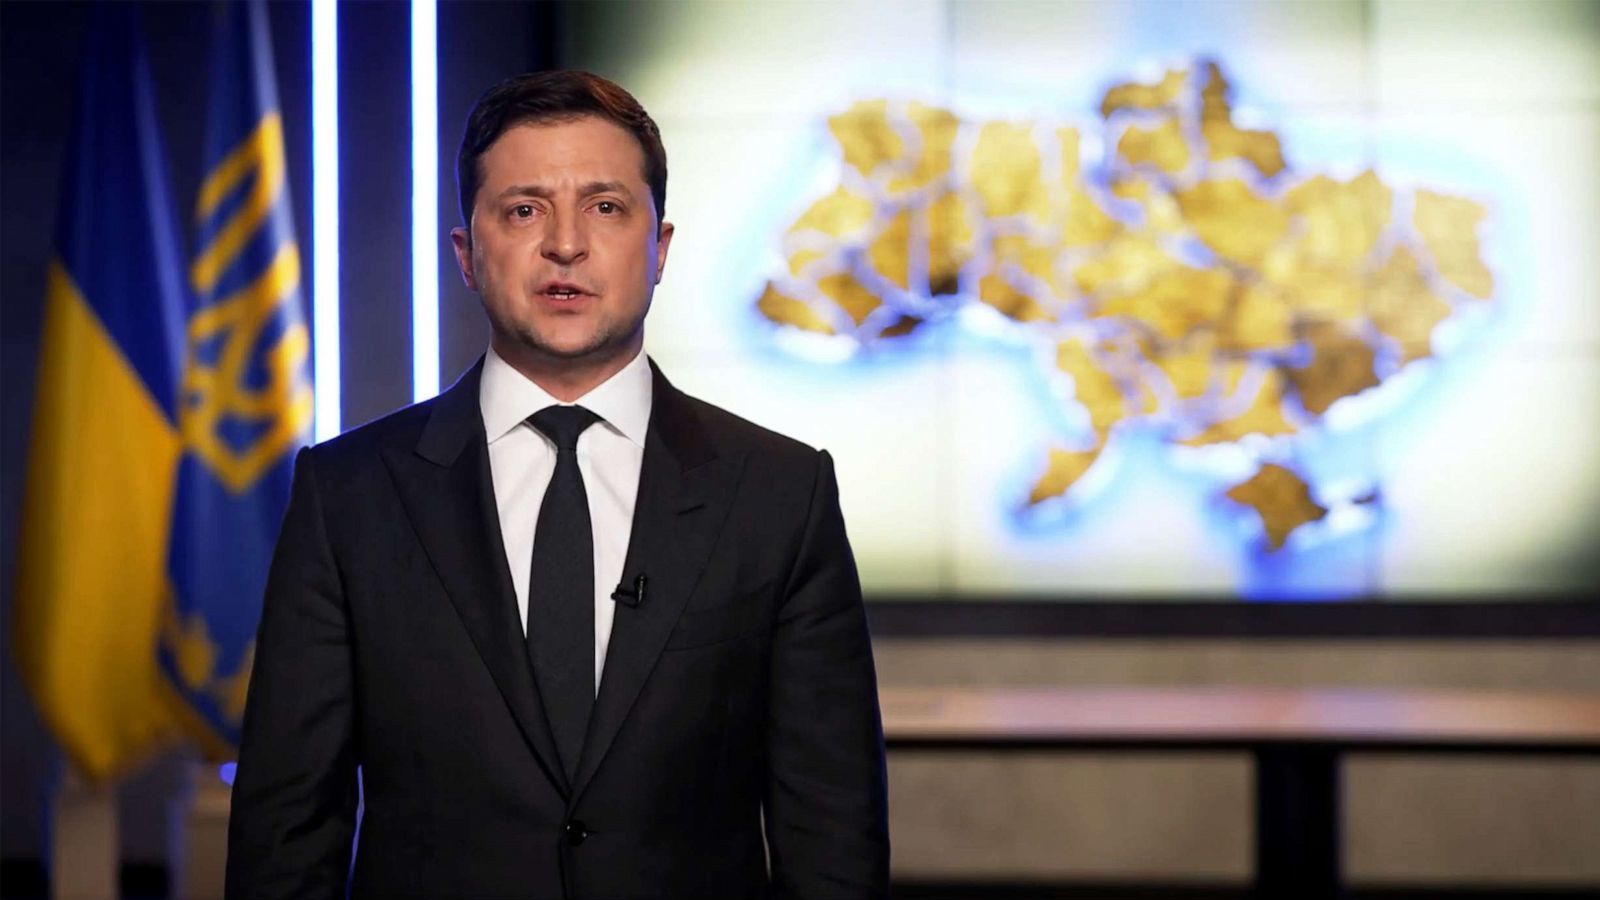 Zelenskyy's office criticizes FIFA for refusing to broadcast the president's message before the World Cup final